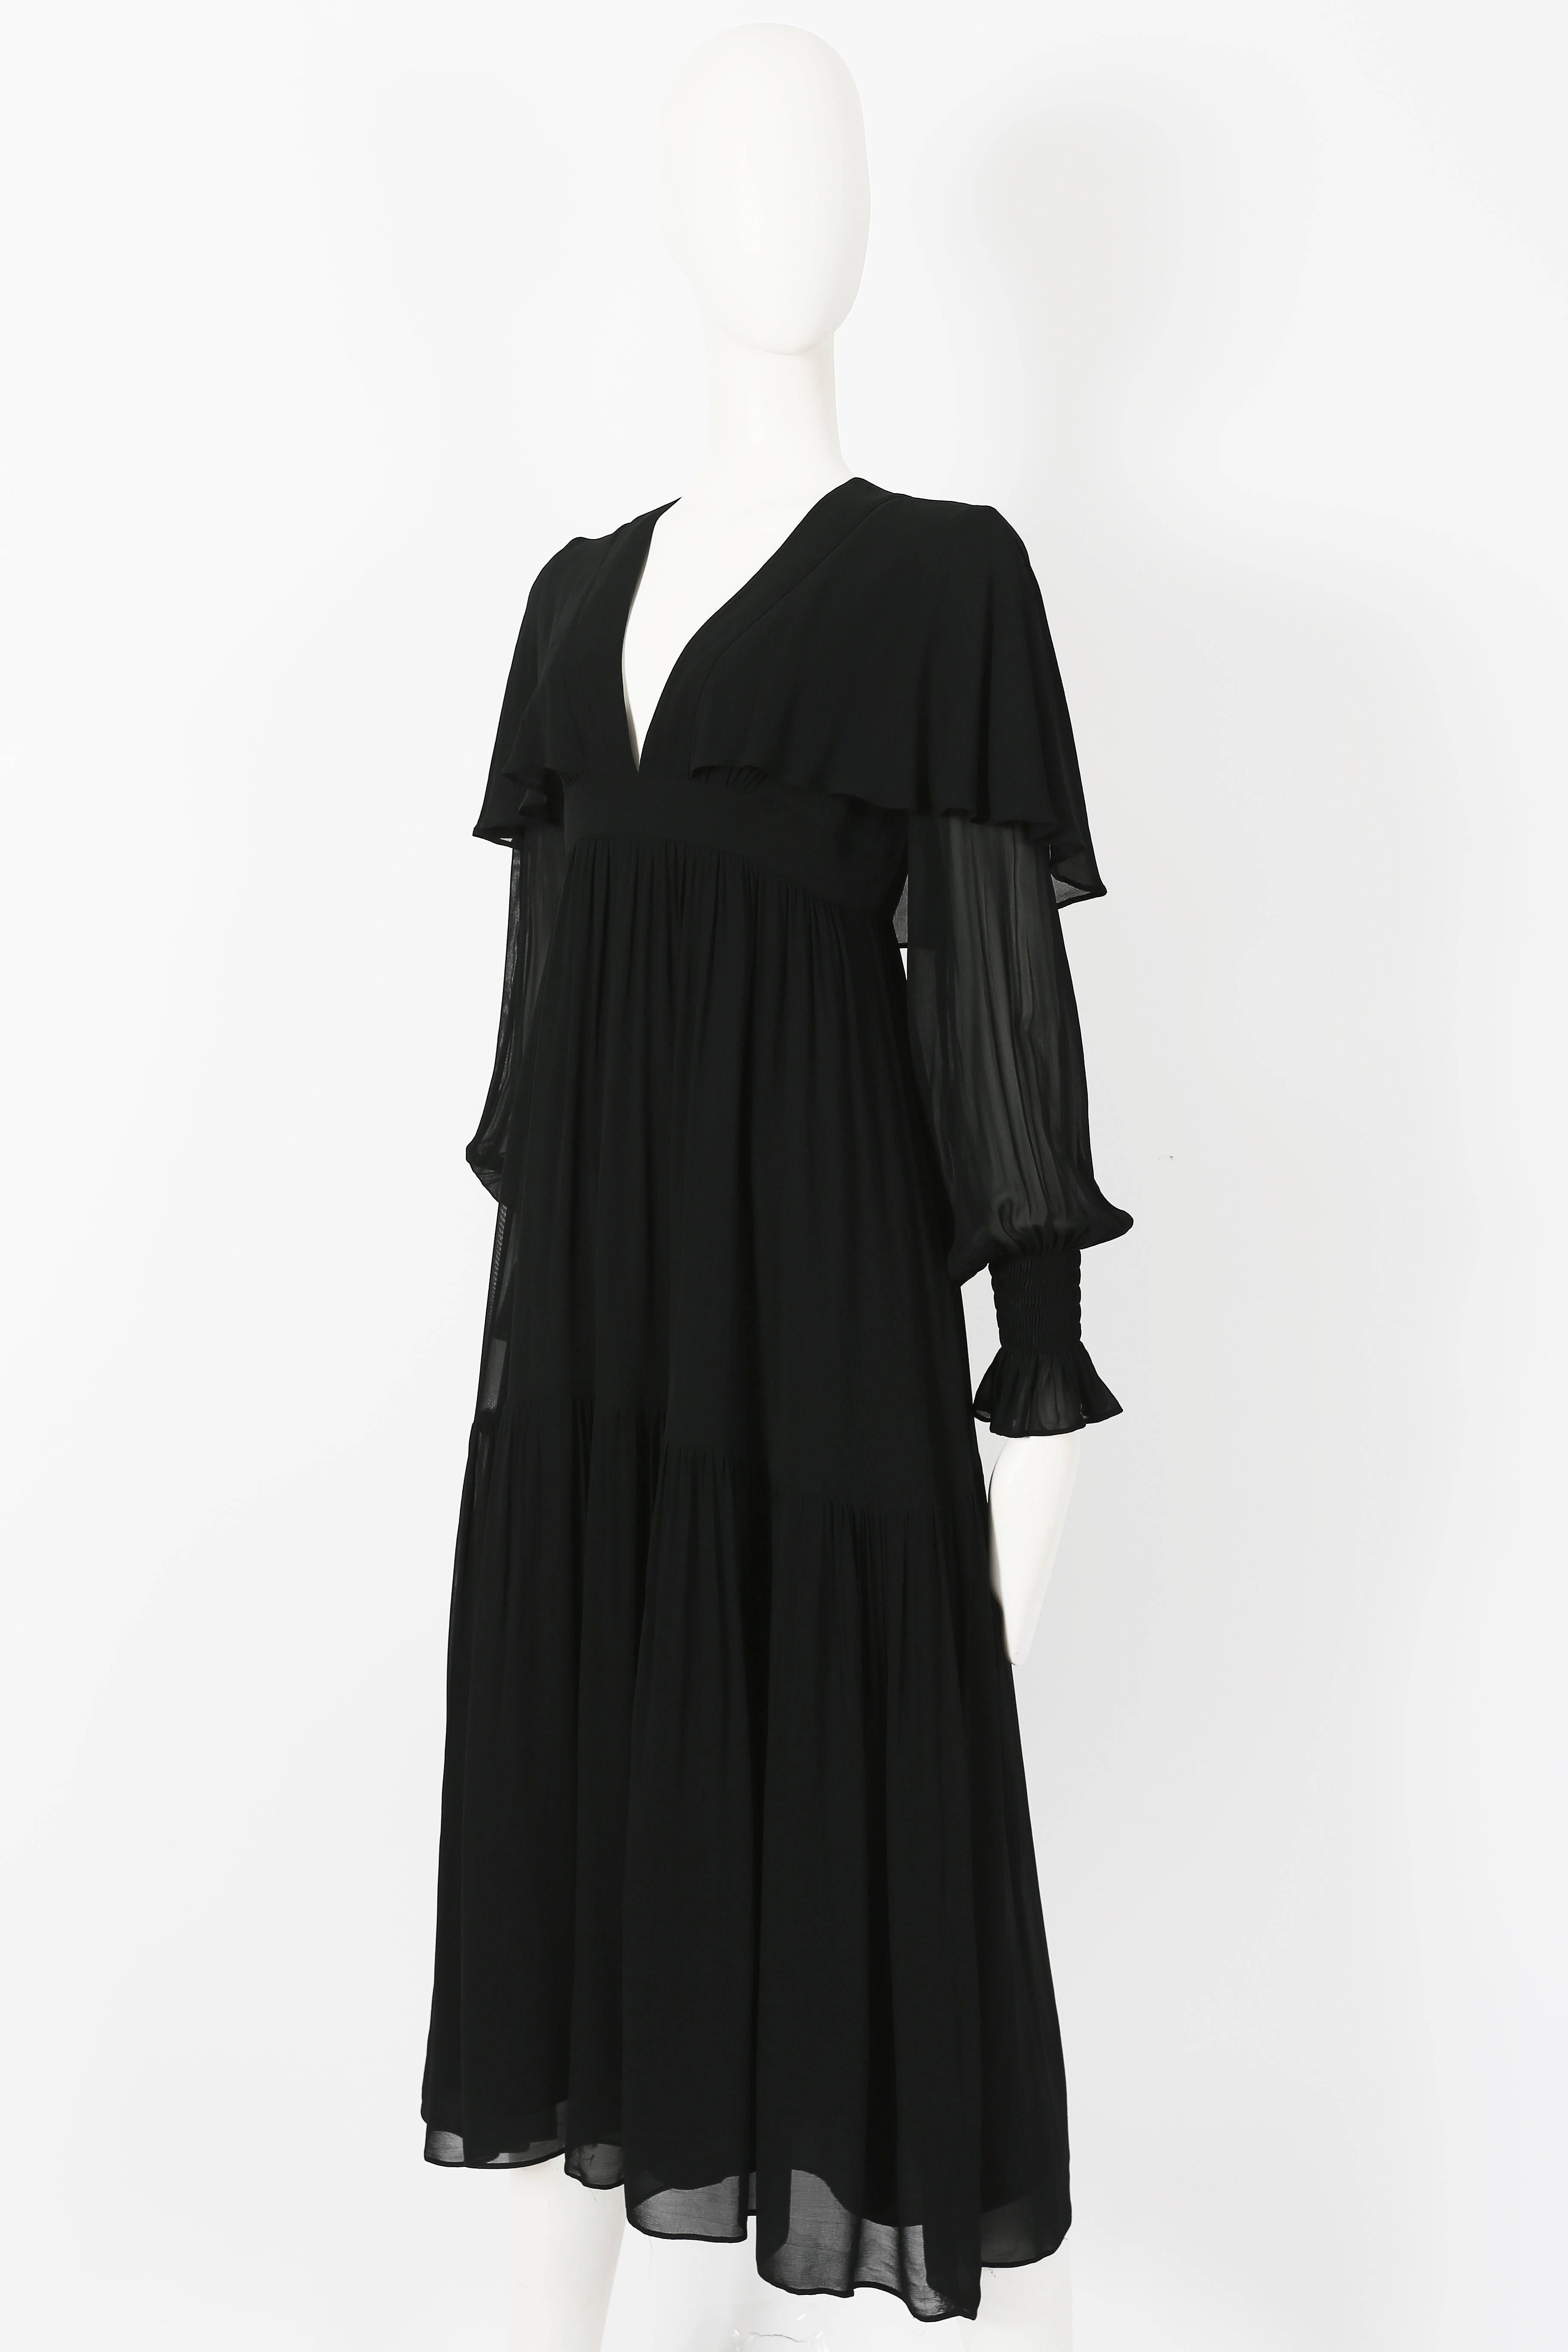 Ossie Clark black chiffon tiered evening dress with capelet, circa 1972 In Excellent Condition In London, GB